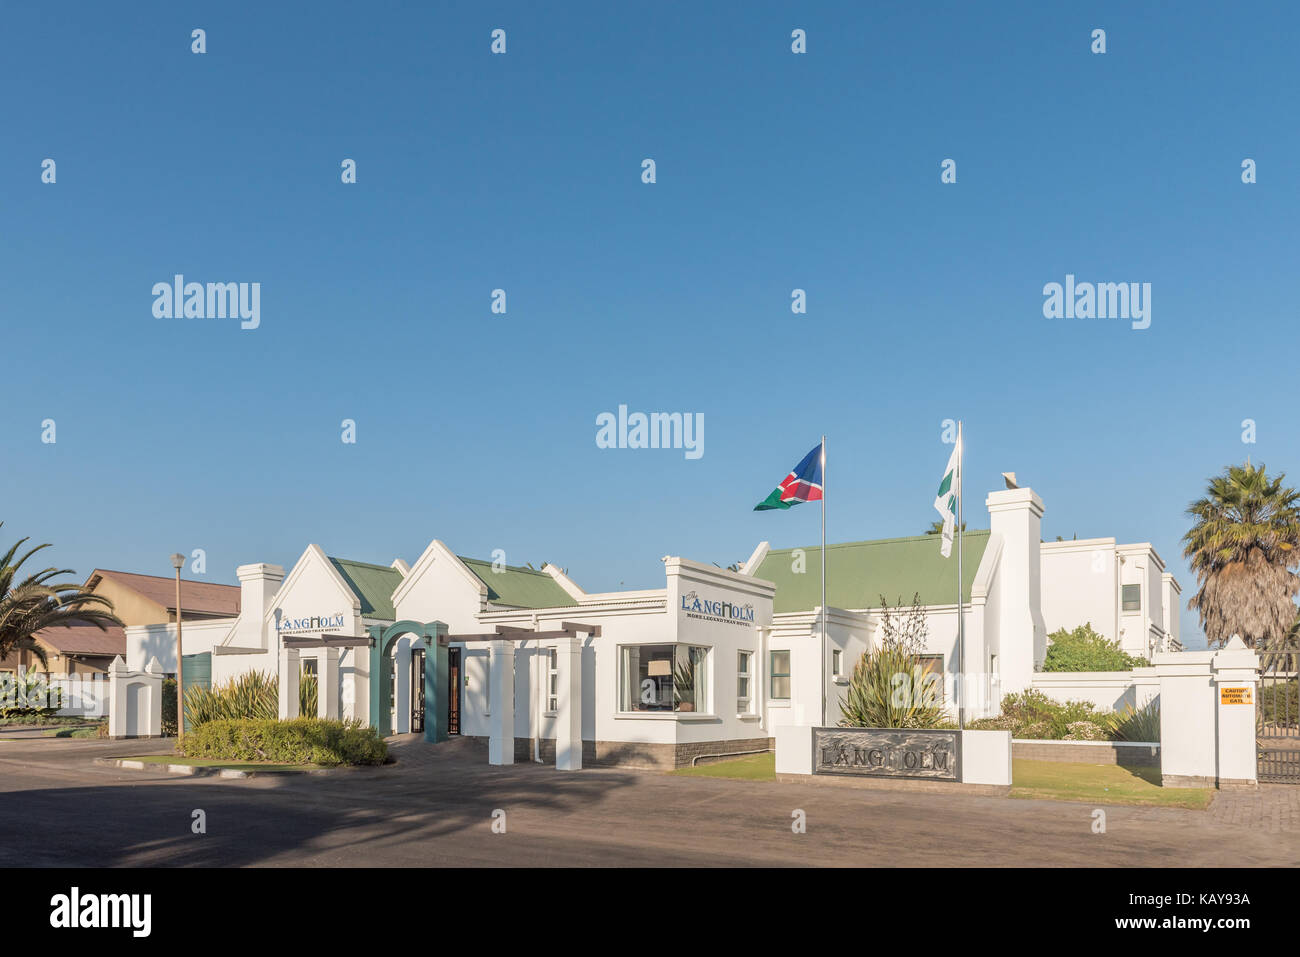 WALVIS BAY, NAMIBIA - JULY 1, 2017: The Langholm Hotel in Walvis Bay on the Atlantic Coast of Namibia Stock Photo